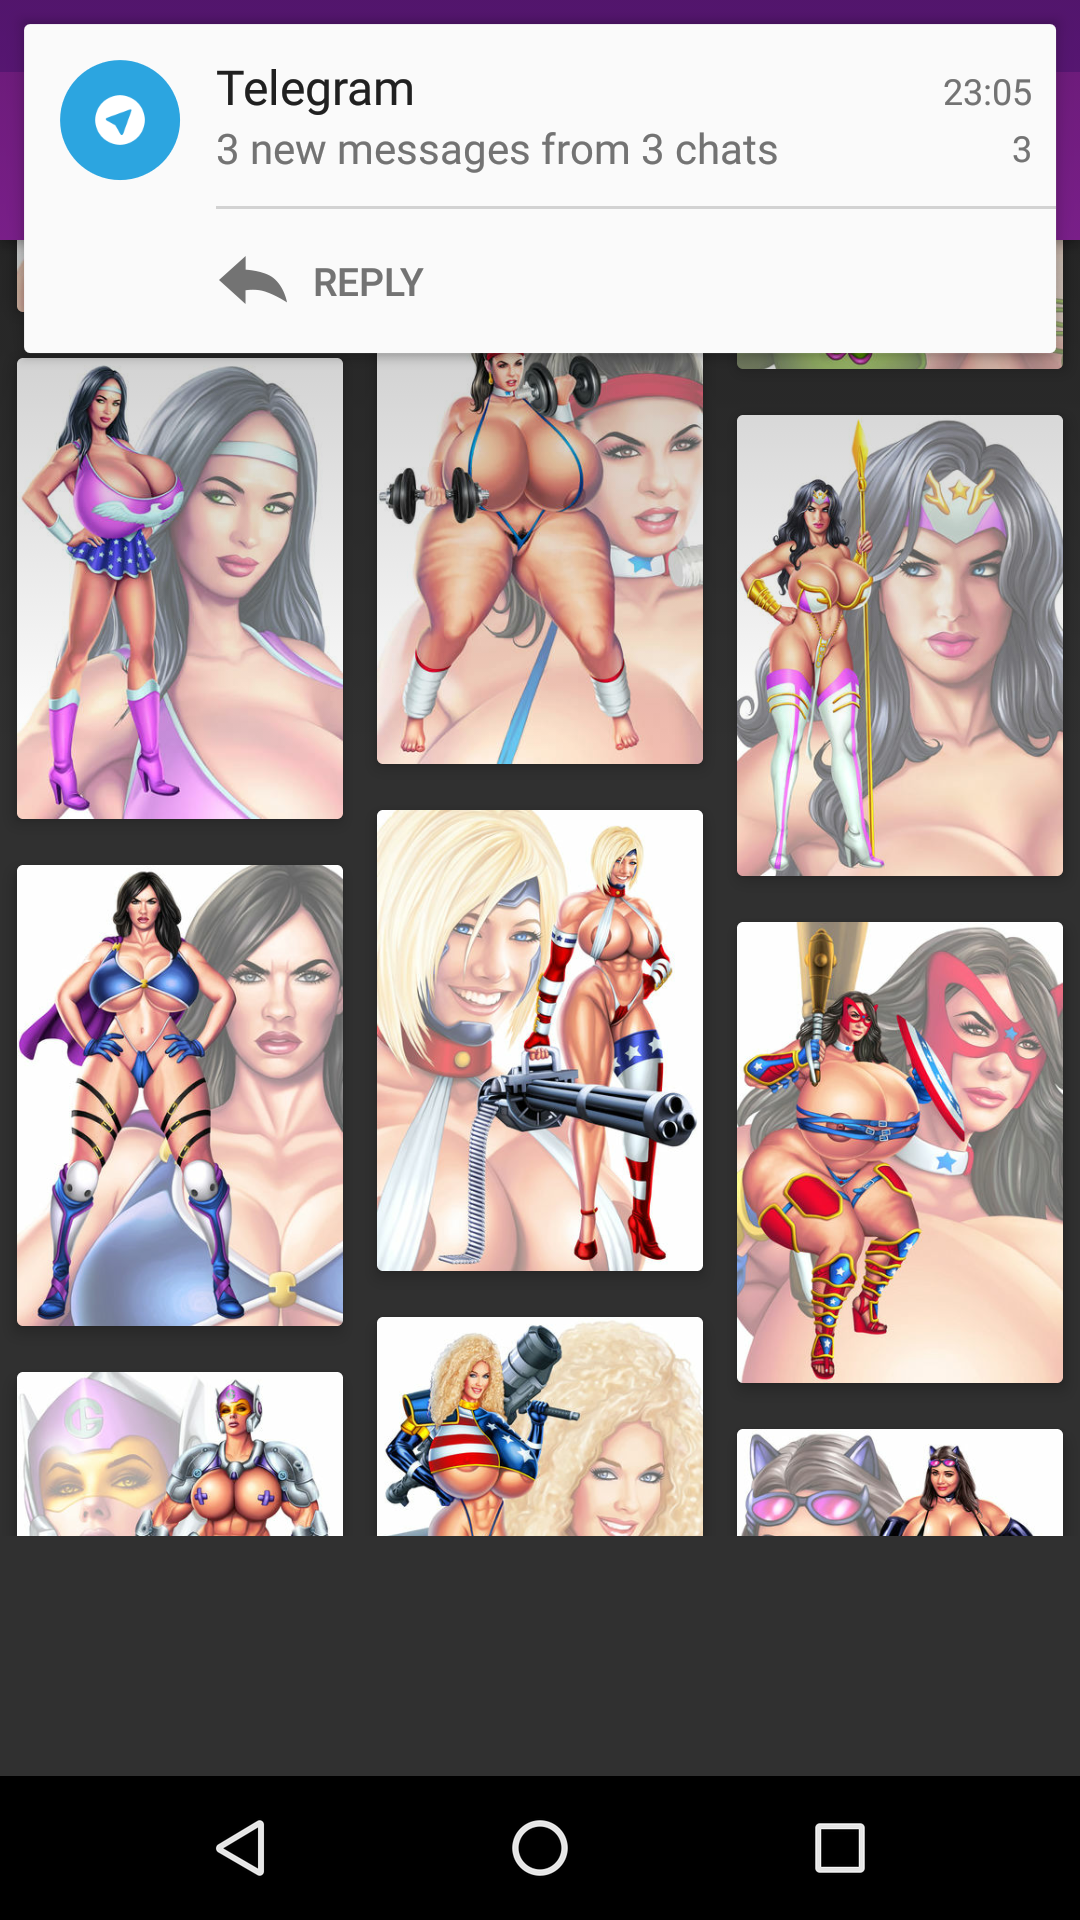 Superheroines pegging,henti,erotic,hentai,download,pornstar,apps,sexy,hentei,images,wallpaper,app,comics,good,collection,latest,pics,porn,hot,superheroines,for,henrai,android,top